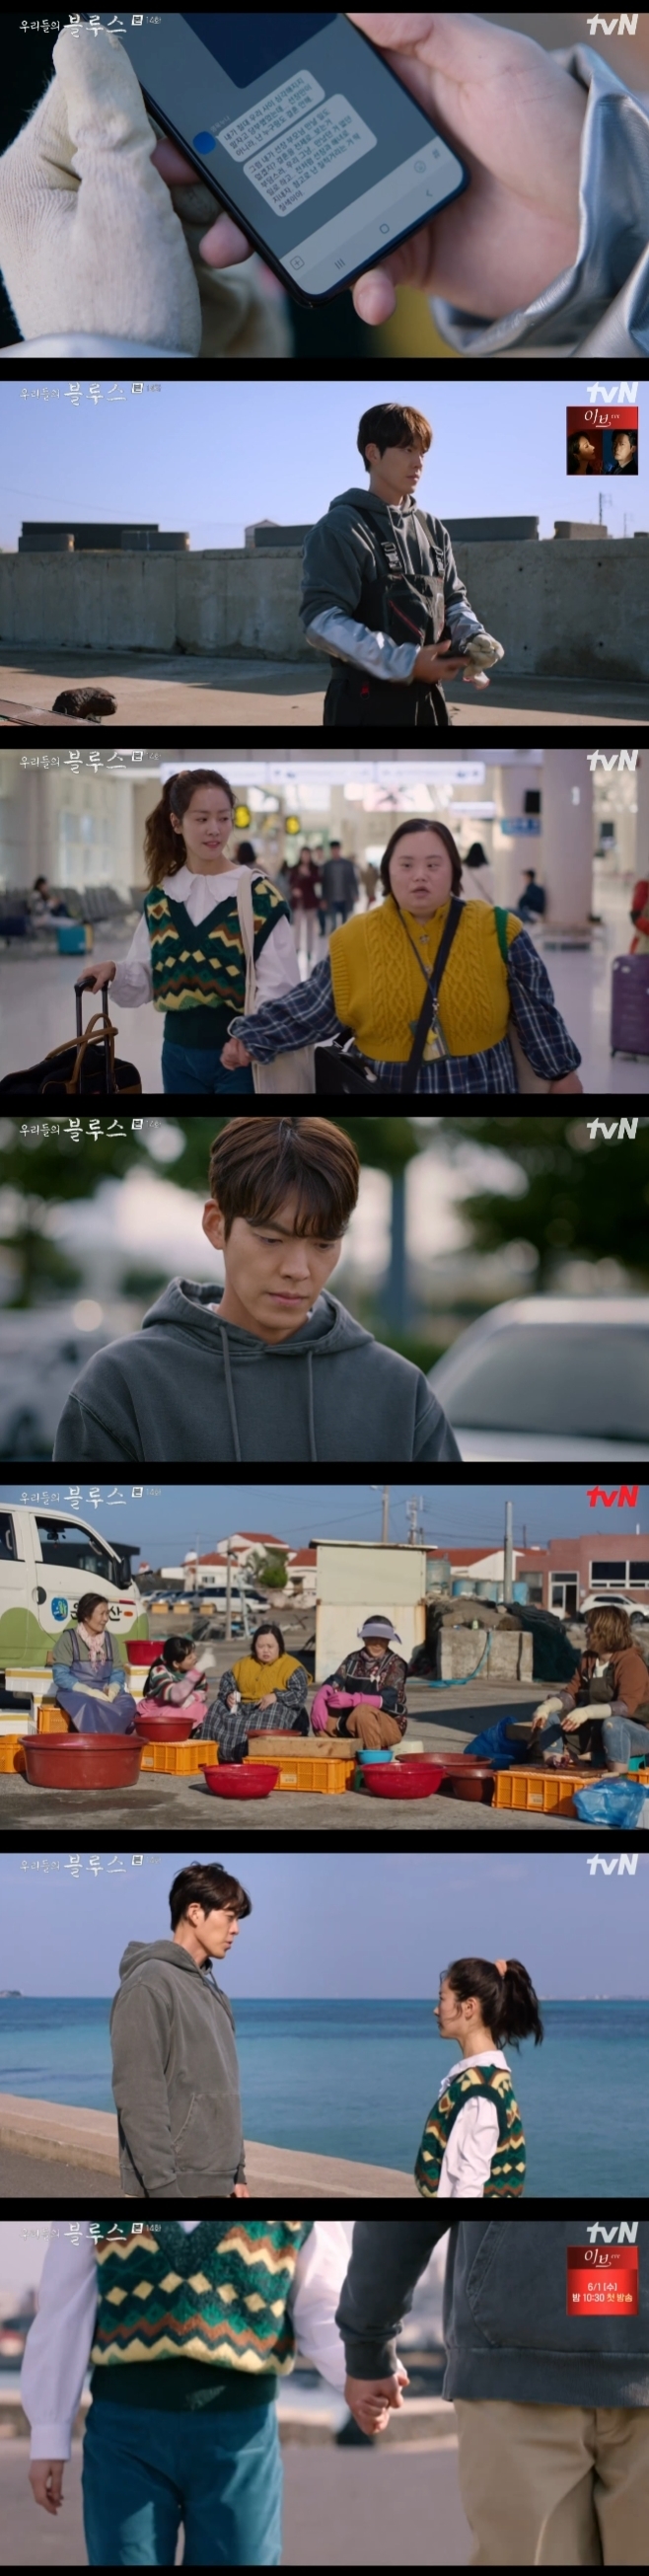 Our Blues Kim Woo-bin promises to be with Han Ji-min foreverIn the 14th episode of TVNs Saturday Drama Our Blues (playplayed by Noh Hee-kyung and directed by Kim Gyu-tae), the identity of the questionable figure Lee Young-ok (Han Ji-min) tried to hide was revealed.On the day, Young-ok received a letter from Chang, saying, Tomorrow at 2 p.m. Planes, Young-hee goes to Jeju Island, and meet me around 3 p.m..What do you mean, youre not going to let Young-hee come to the barbarians. You cant. When you go out, Im gone.I will try to persuade him well, but Chang said, Younghee is not a problem.I have to go home for a week with all the Friends here, and I can not see it, he said.I can not have Young-hee. I can not take a vacation like a company. I have to move together at once.I know your situation, too. Its different from the old days of Younghee. Sociality has improved and schizophrenia has already healed.Planes, get out in time. If you do not leave, the crew will be in trouble. Young-oks head became complicated, and in the meantime, Park Jeong-jun (Kim Woo-bin) mentioned to him even marriage, so he had one more thing to care about.In the end, Young-ok said goodbye to Jin Jun after a long trouble.Before going out to the material, he said, Didnt I ever ask you to never get serious between us? I do not marriage with anyone as well as the captain.Its a burden to assume marriage. Lets just do what we never met and stay captain and haenyeo.For reference, I hate to be squeaky, but Jin Jun caught him saying, Lets talk about it. Jeong Jun followed him to the airport, and he learned about the existence of Young Hee. When Jeong Jun took a slightly surprised gesture, Youngok seemed to know it.Me and Twins Sister Young-hee. Down Syndrome. If you dont know what it is, look up the Internet.Young-ok also introduced Sister Young-hee to her fellow maids, who were surprised by his presence, but soon received warmly.As if they had seen each other for a long time, the sea ladies talked about the story by grooming the fish with Younghee.In the meantime, Jeong Jun talked again with Young Ok, who spoke a strong word and tried to leave Jin Jun.If thats burdensome, Ill never say it again. You dont want to meet my parents, but whats so important is that were not children and fun?It could be serious. How can people giggle every day? This is how people live. Yeah, I was surprised to see Younghee at first.But Ive never seen Down Syndrome before, and I can. Im sorry if thats wrong.I never learned how to look at someone with such personality at school or at home. I didnt know what to do.It never happens again, so dont just say goodbye.Why do you break up with each other? In the persuasion of Jeong Jun, Do you hear the sound of meeting me even if you see Young Hee?Young-ok said, There is one more thing that will be nice to me. My parents died when I was 12 years old.Everyone pretended to be okay at first, but eventually I was sick of me and Younghee, and I was hurt so much every time, so I wanted to hide Younghee from you this time.Dont be a fool, but go when you let me go. Youre not like them.I do not care about your family and now you do not care about your gaze, and I think you can be like a family forever. Jeong Jun said, I am different from them.I will not send it even if I die. I will surely regret this. I saw me too little. 